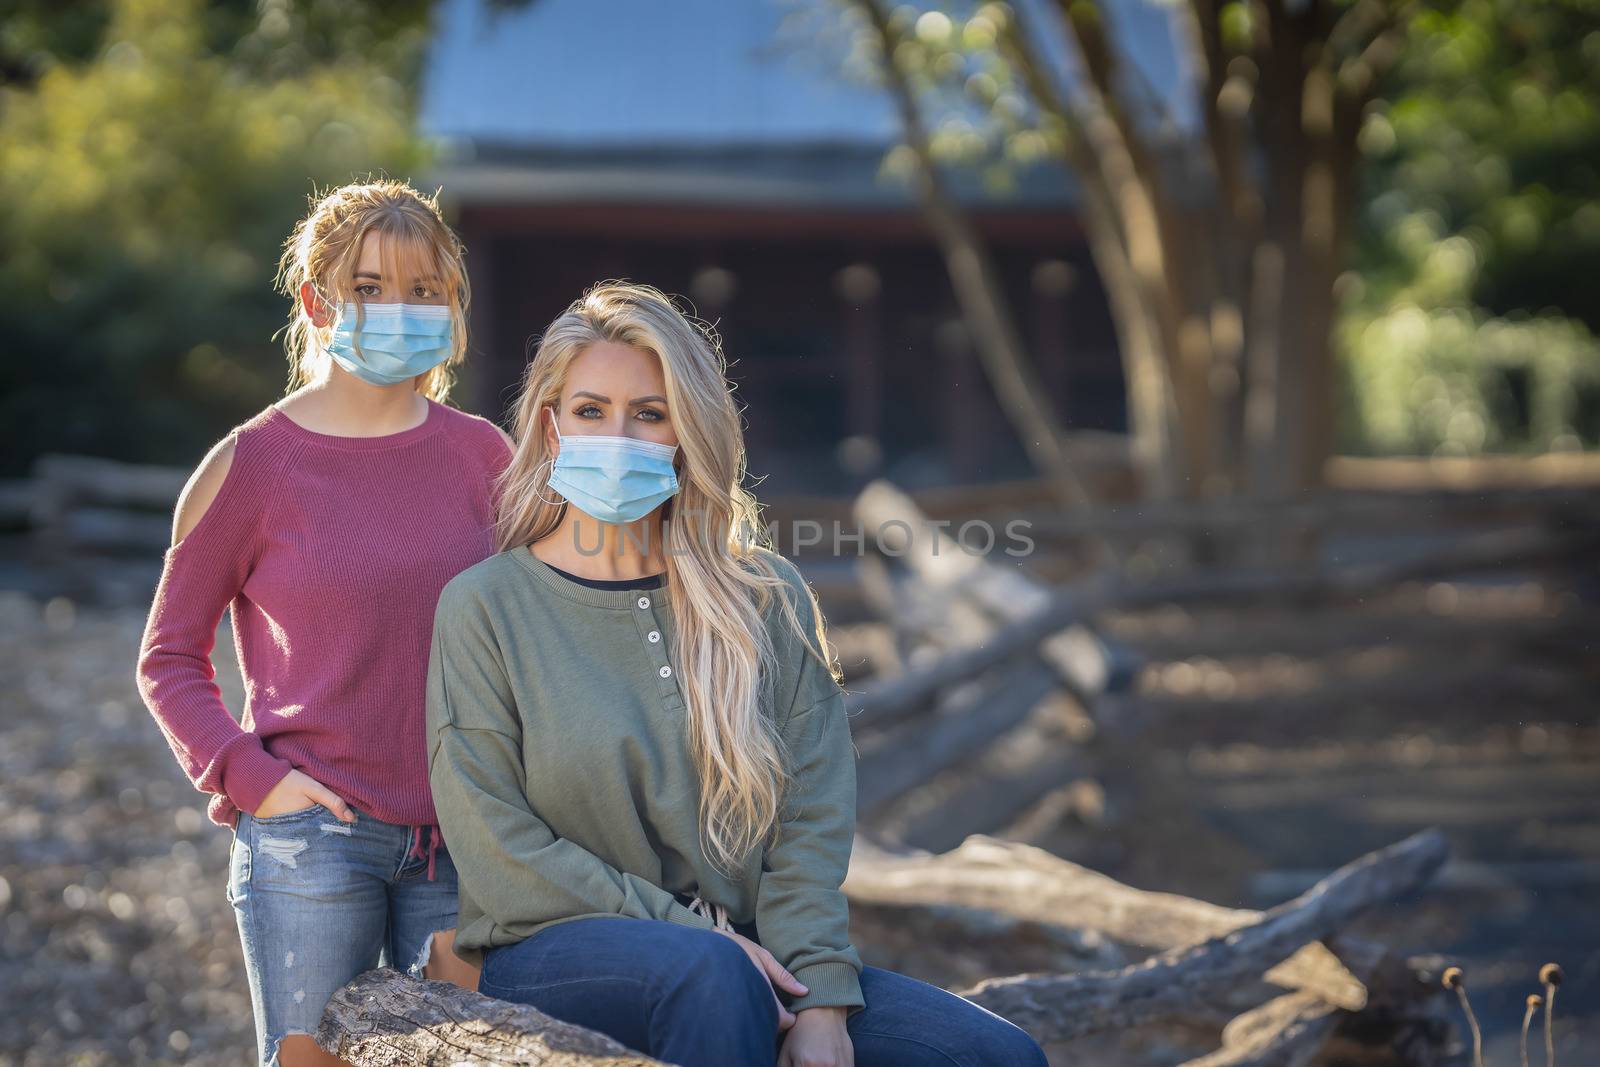 A mother and daughter enjoy a day outdoors while wearing masks and maintaining a safe distance from others during the Covid-19 pandemic